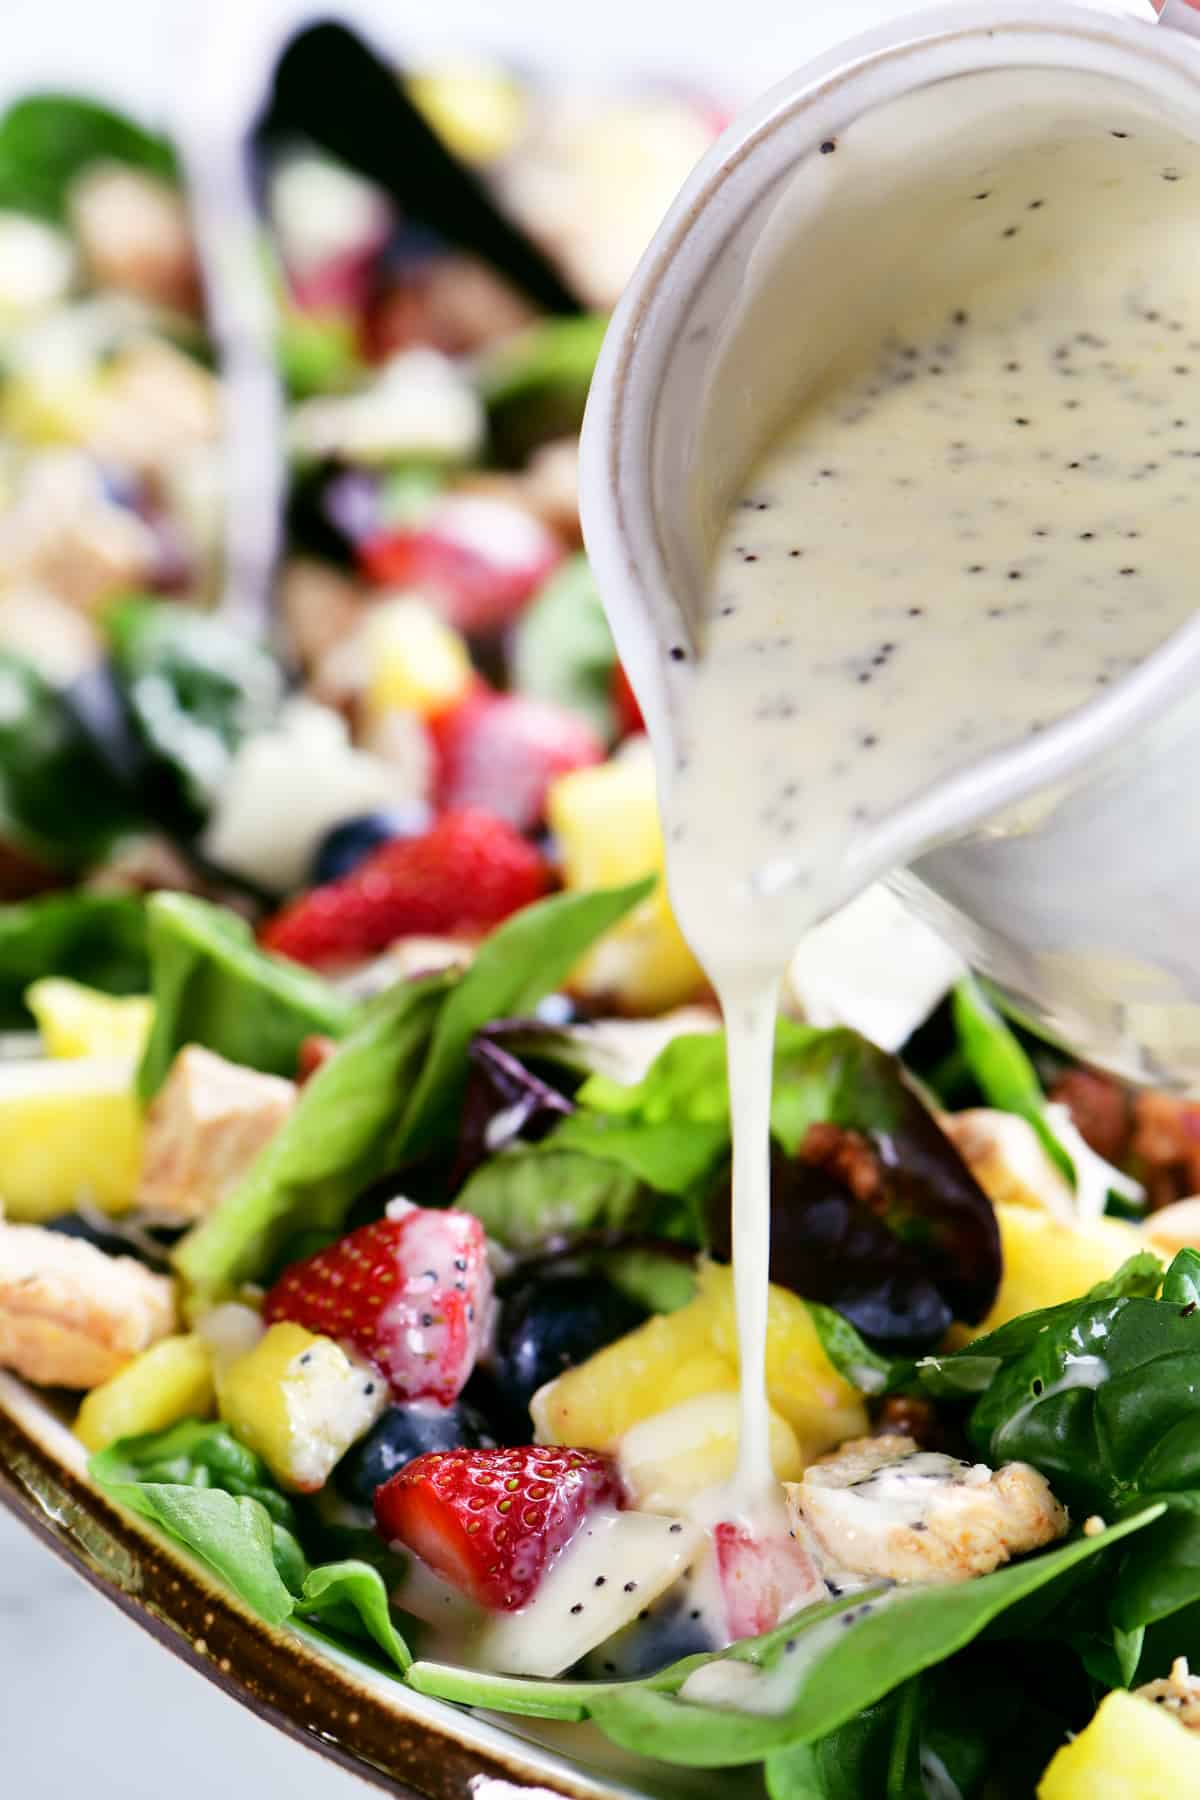 pouring poppy seed dressing from a white pitcher onto a salad.